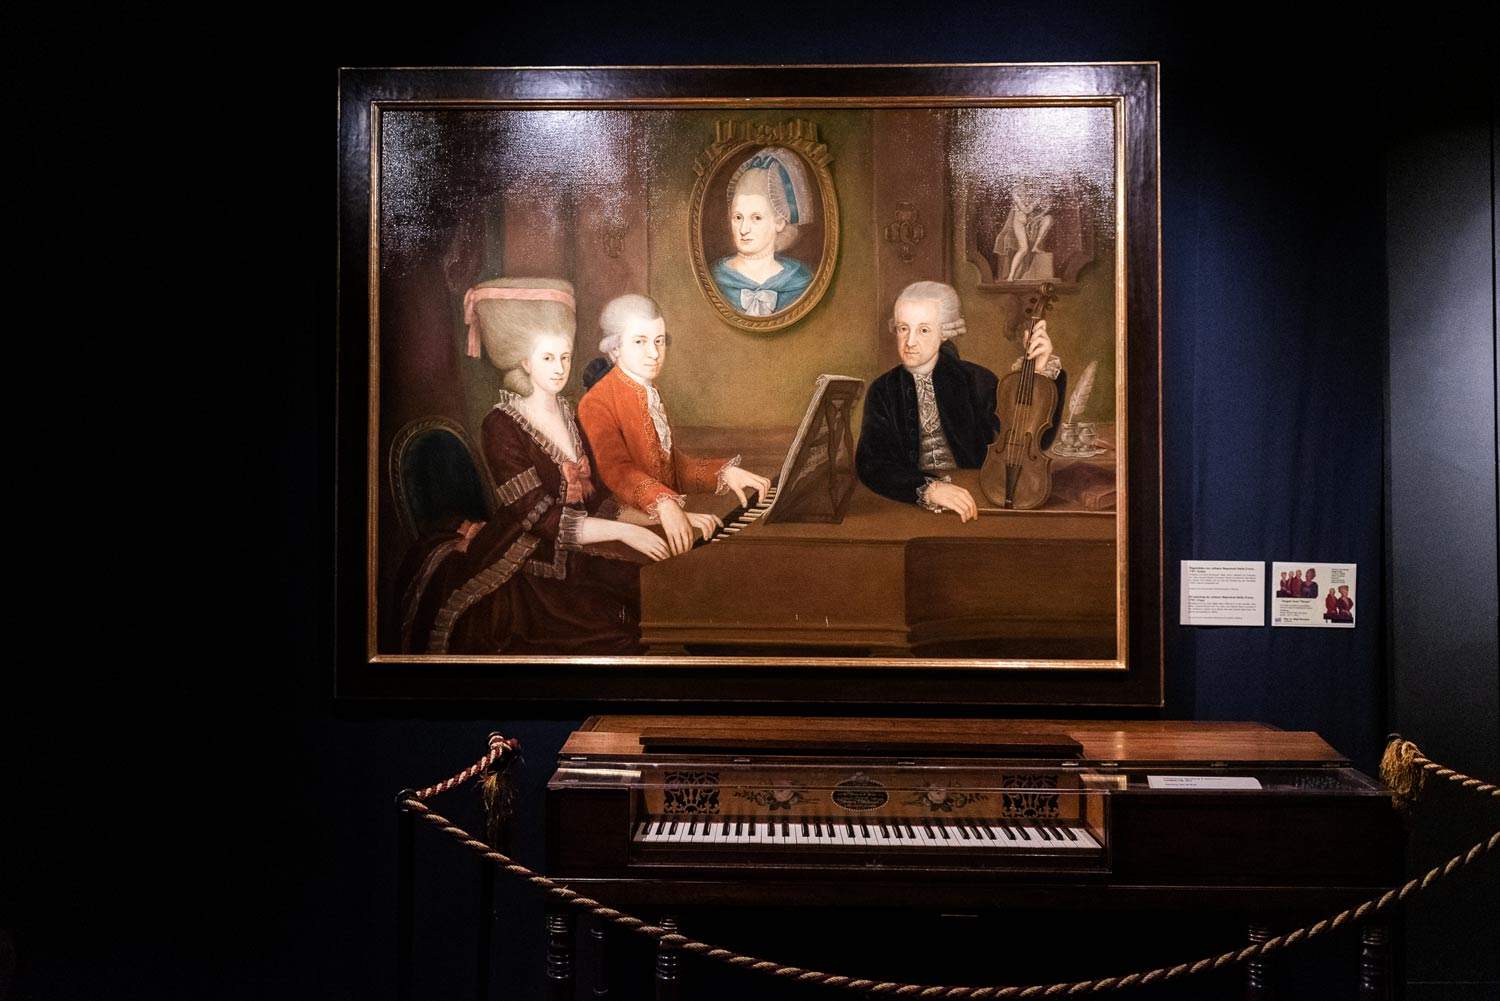 The Vienna House of Music: an immersive and playful journey into the world of sound